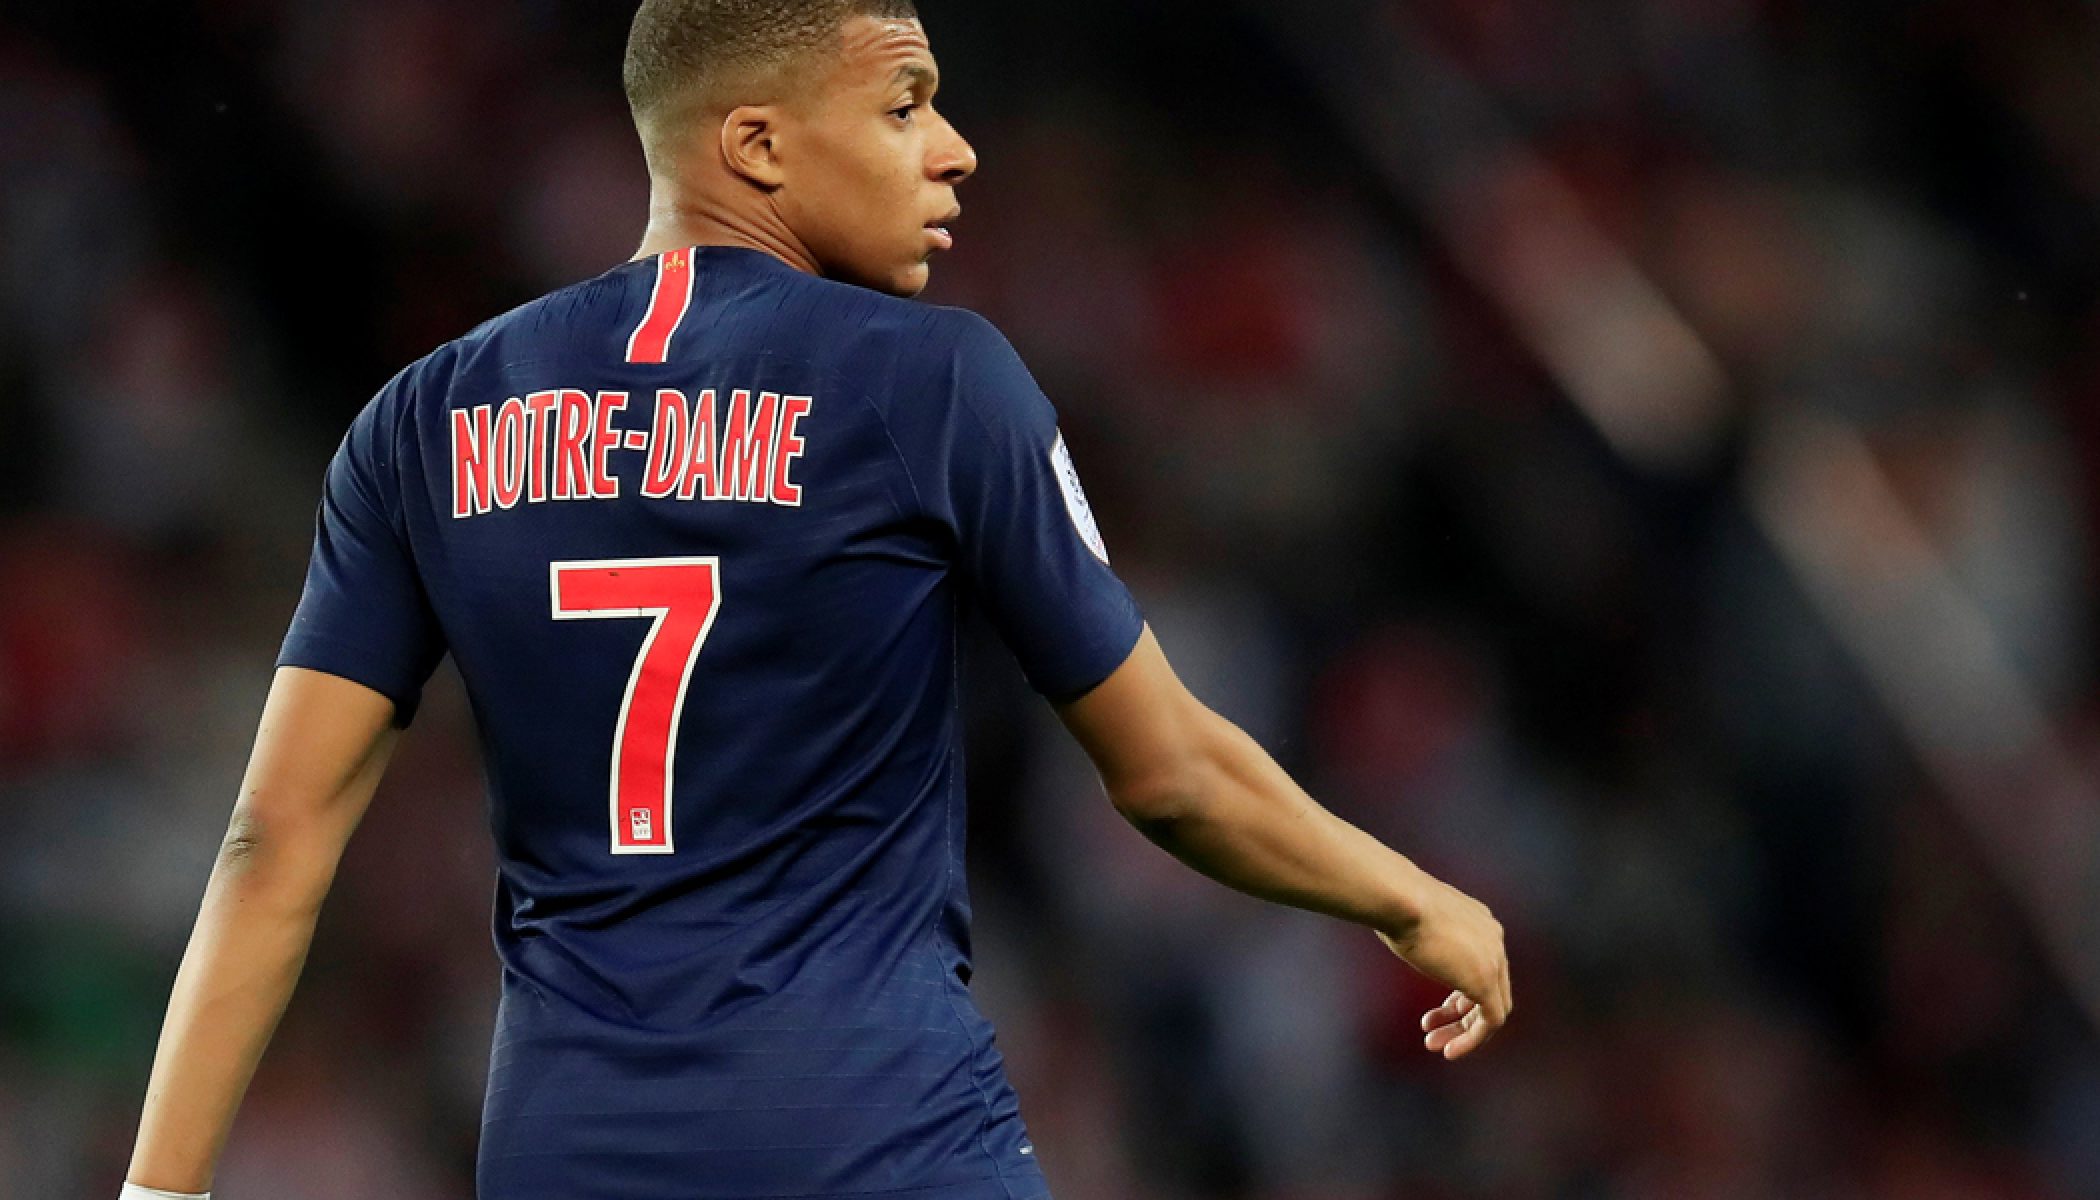 psg notre dame jersey for sale